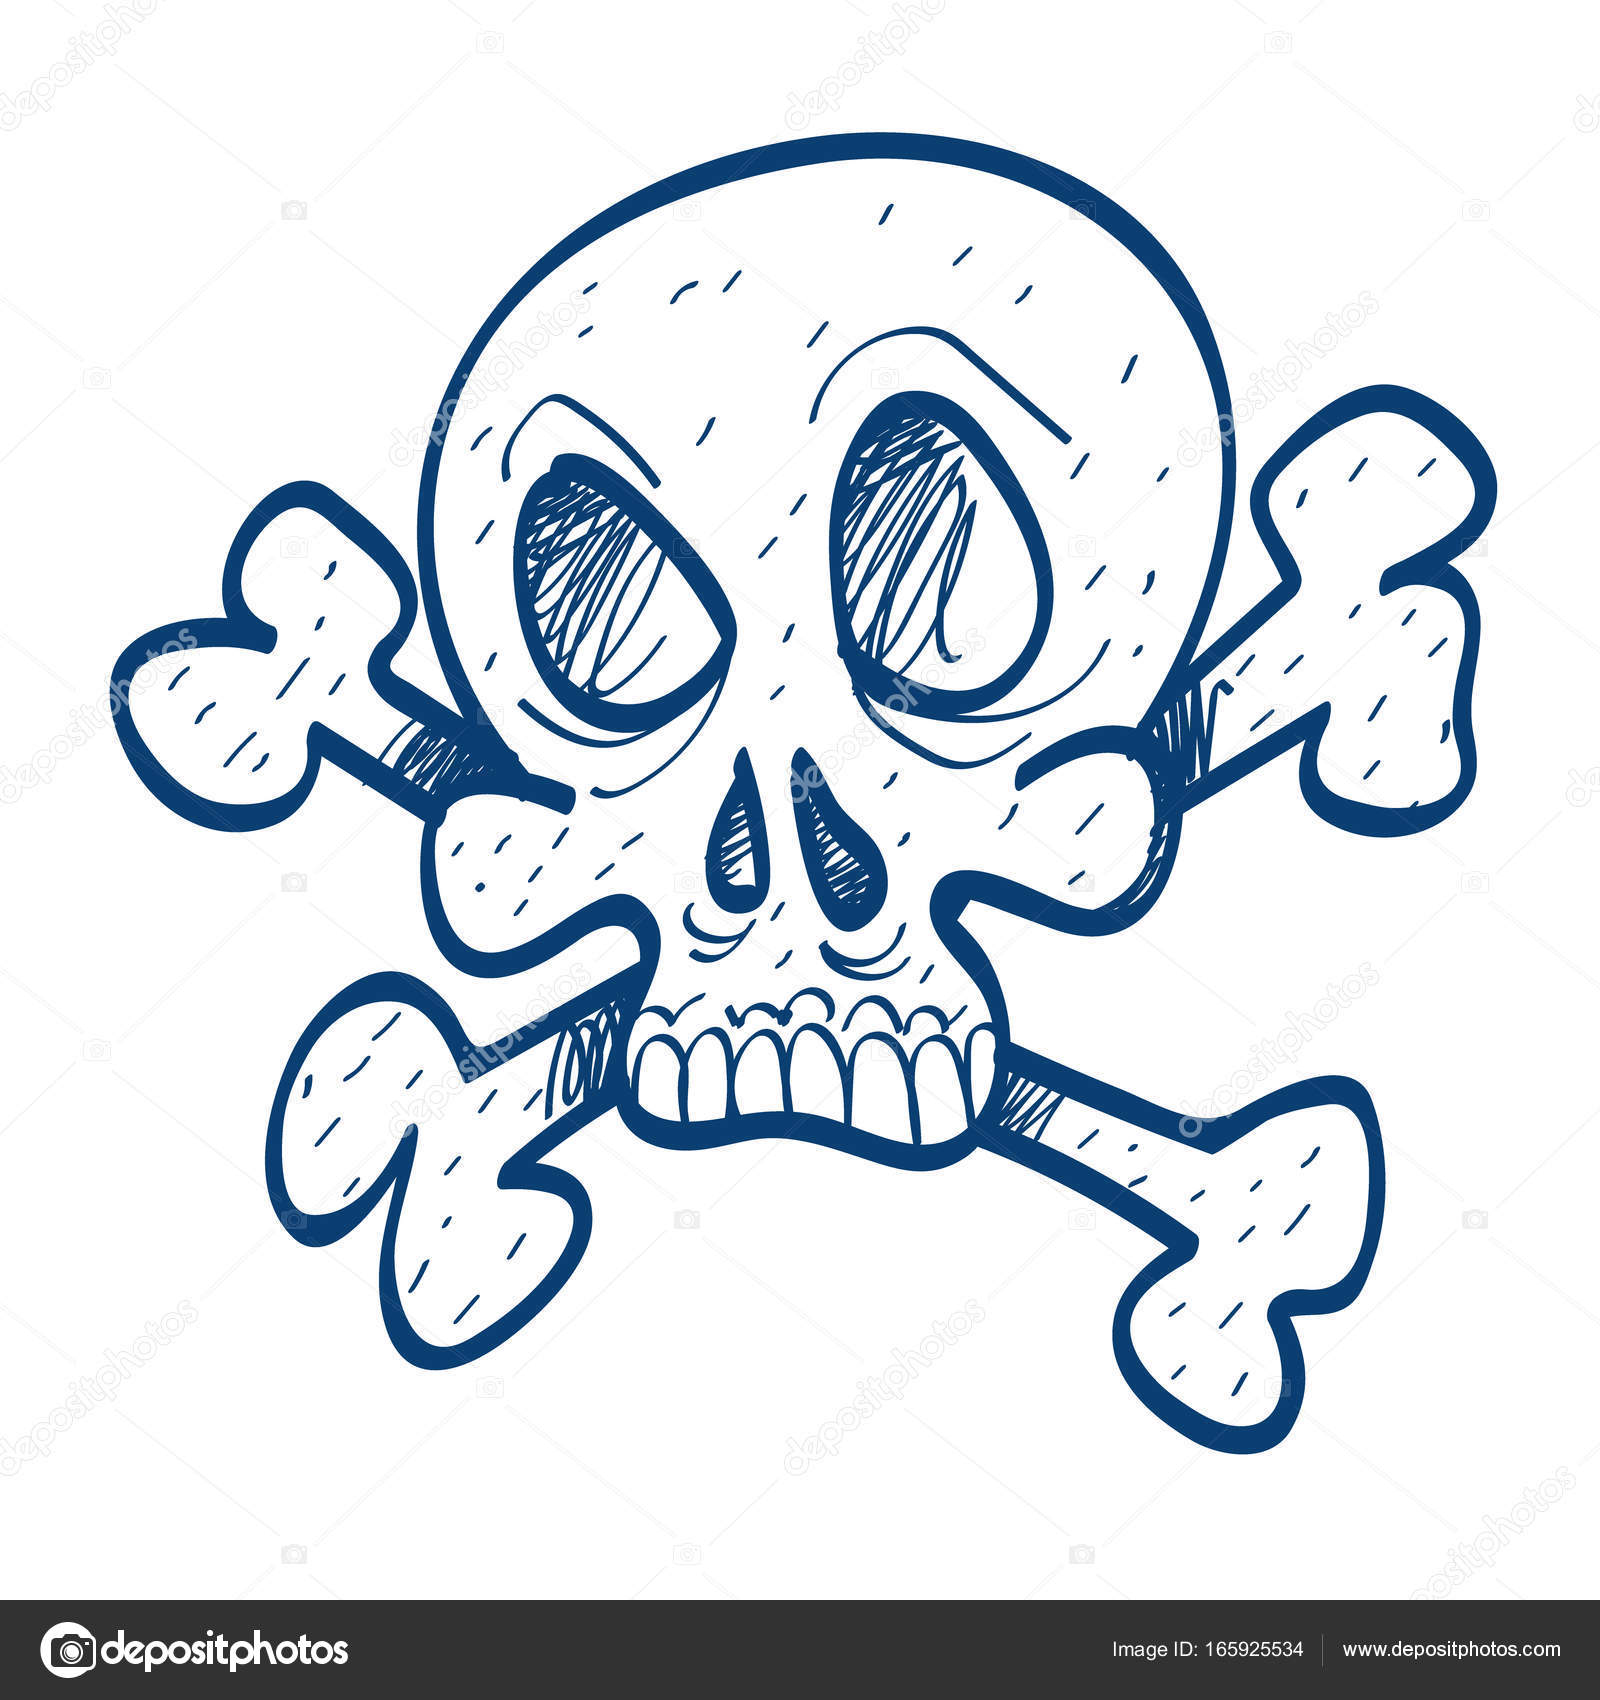 Skull And Bones Icon Stock Illustration - Download Image Now